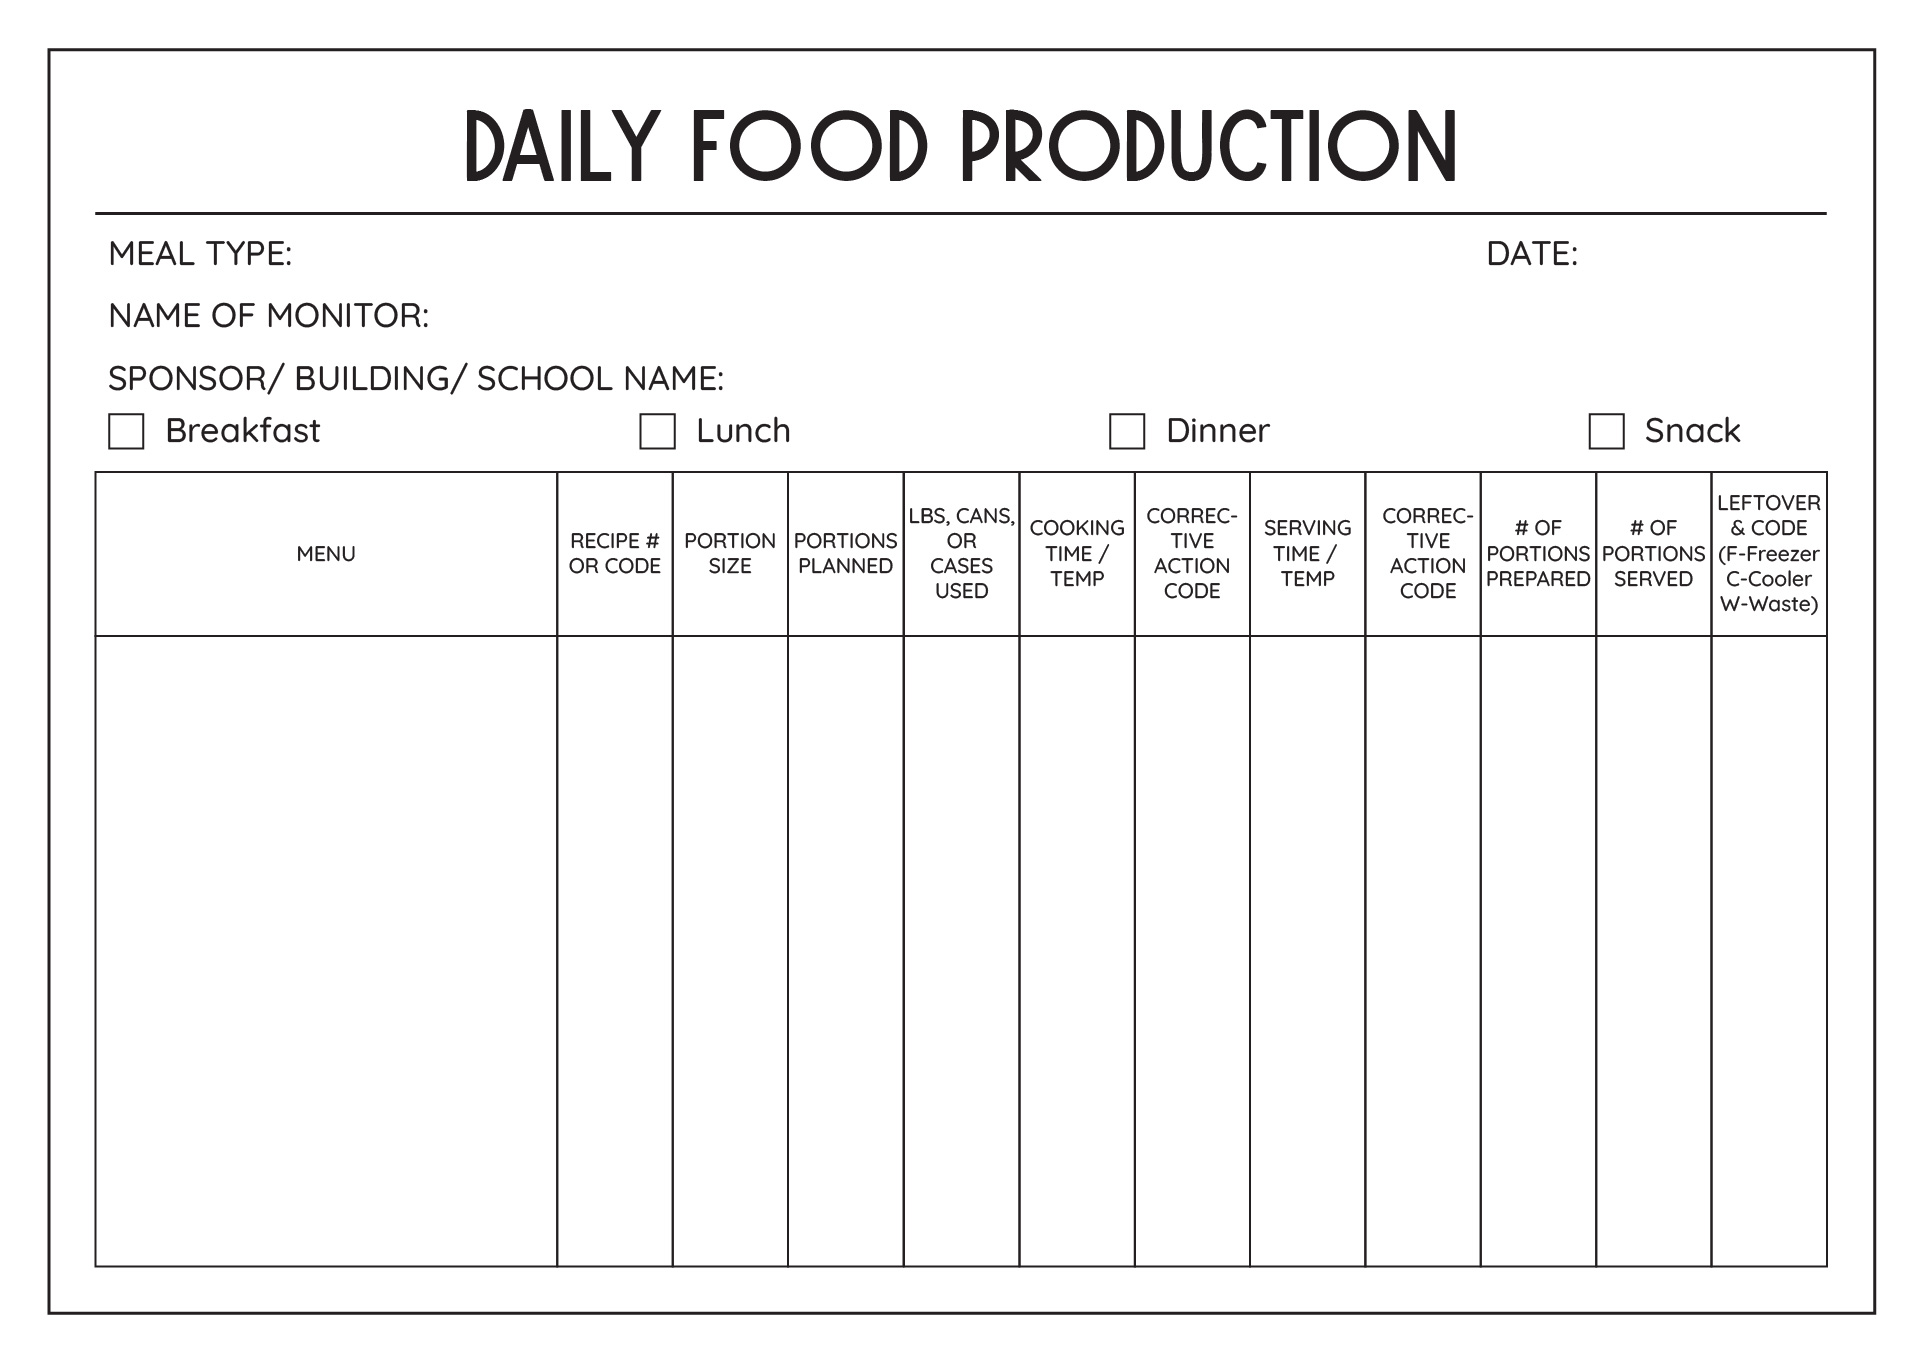 Daily Food Production Sheet